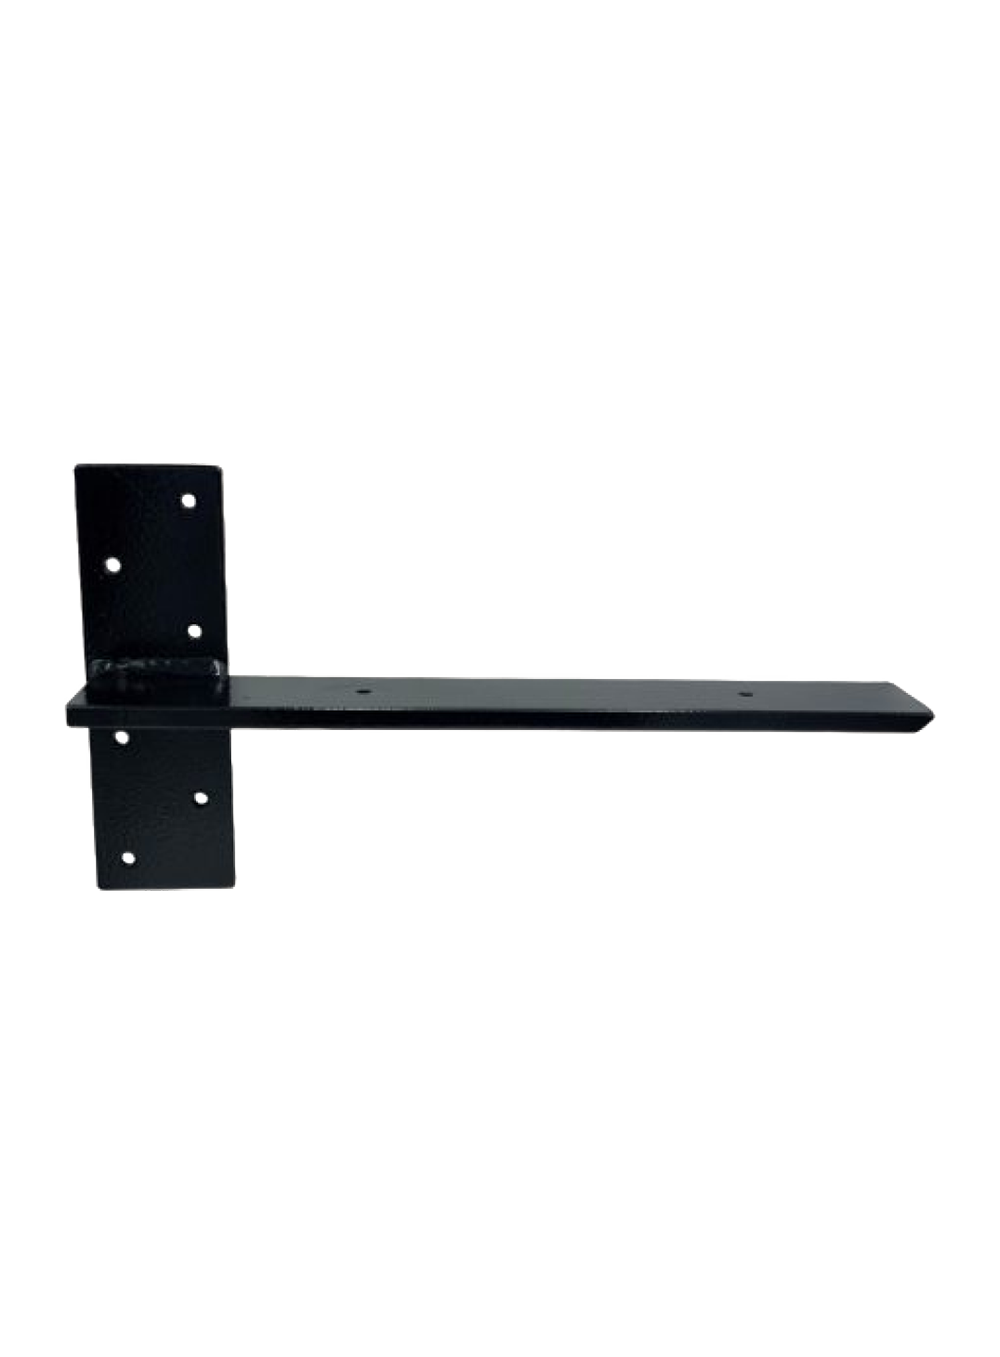 Is the length of the bracket measured  from the projection past the mounting bracket or total length